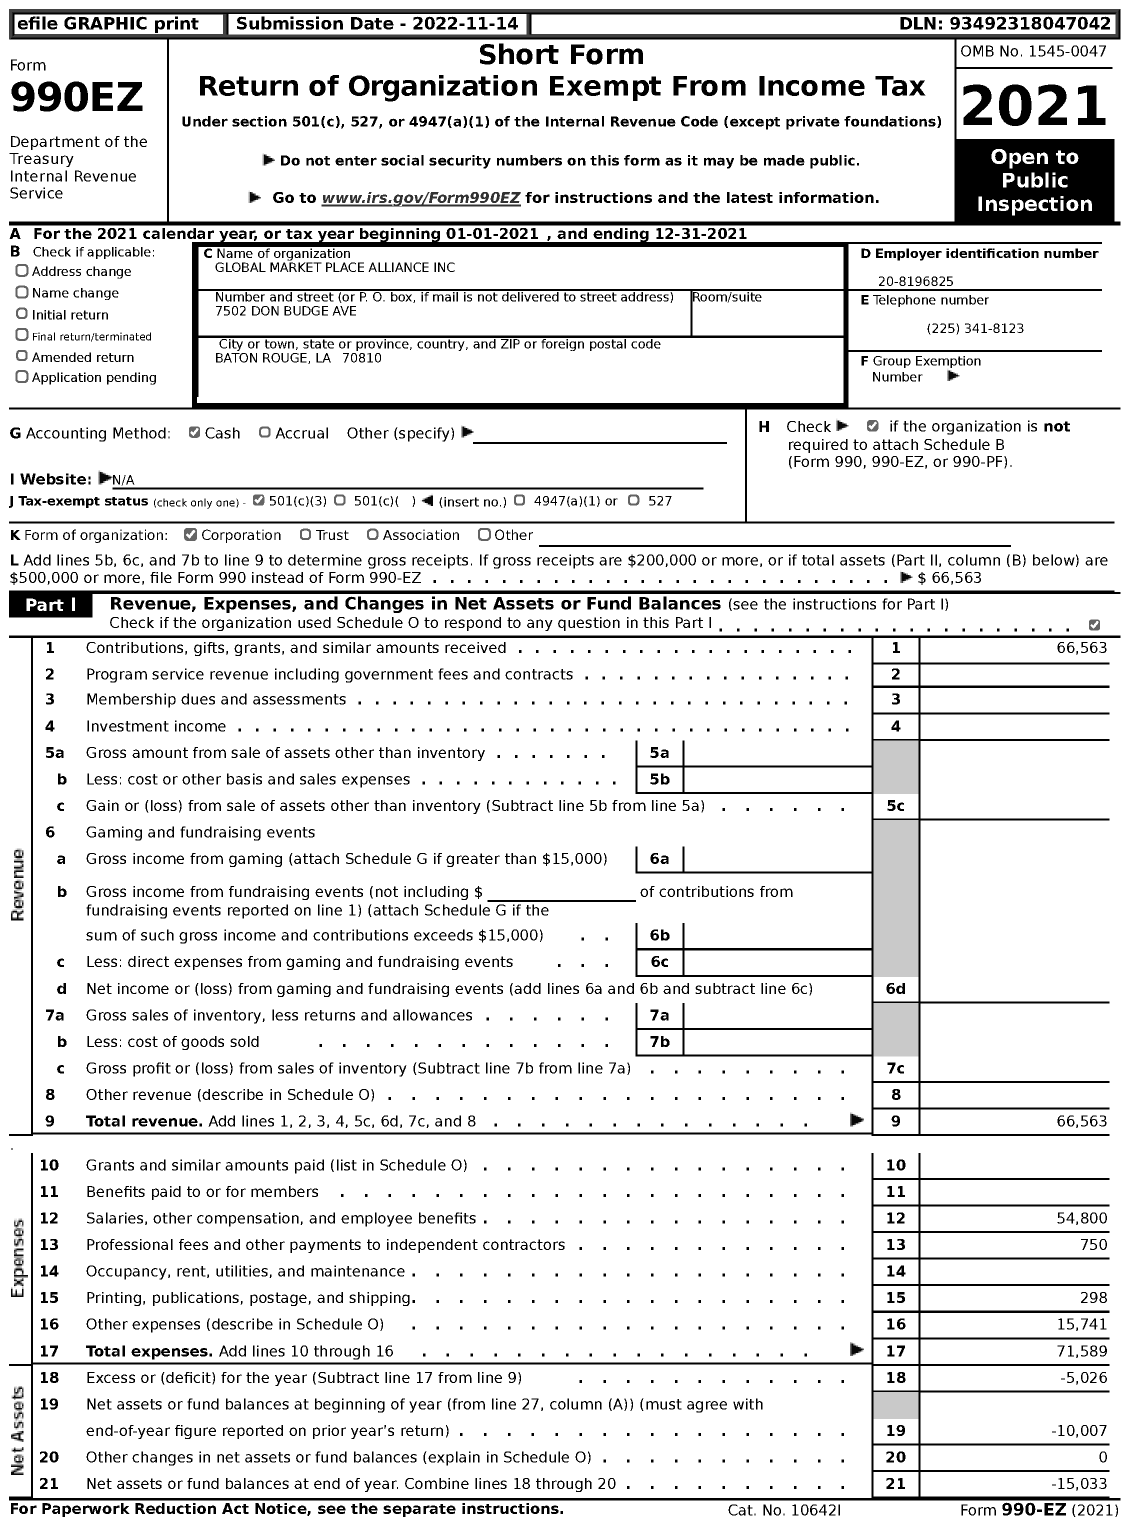 Image of first page of 2021 Form 990EZ for Global Market Place Alliance